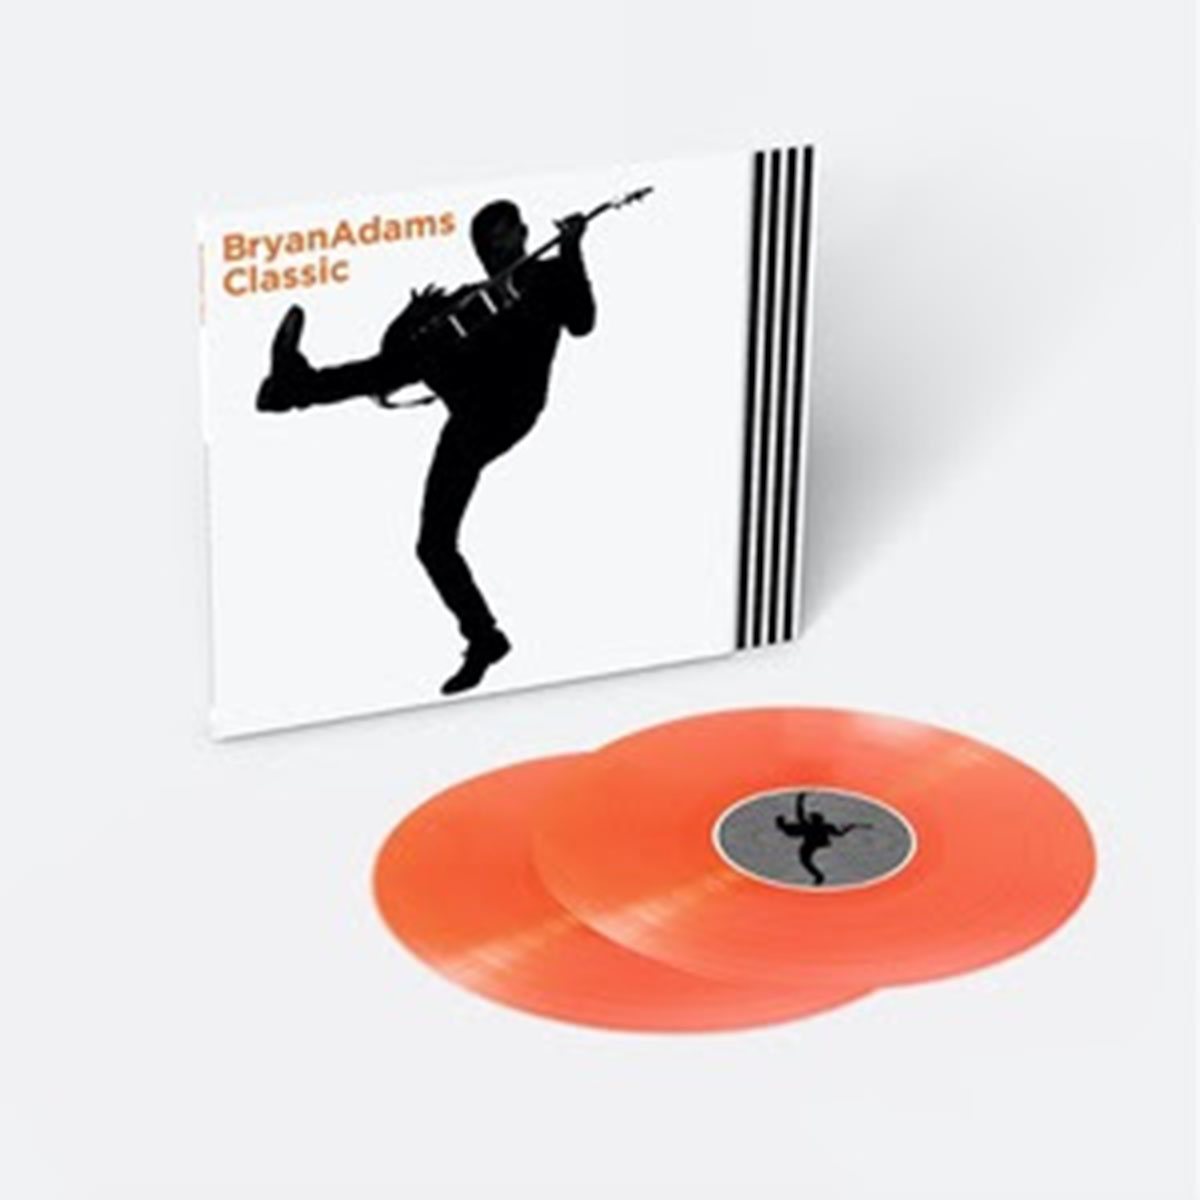 Classic 2LP Vinyl (Orange with side D etching of Adams’ silhouette on a spiral background) Exclusive D2C Item